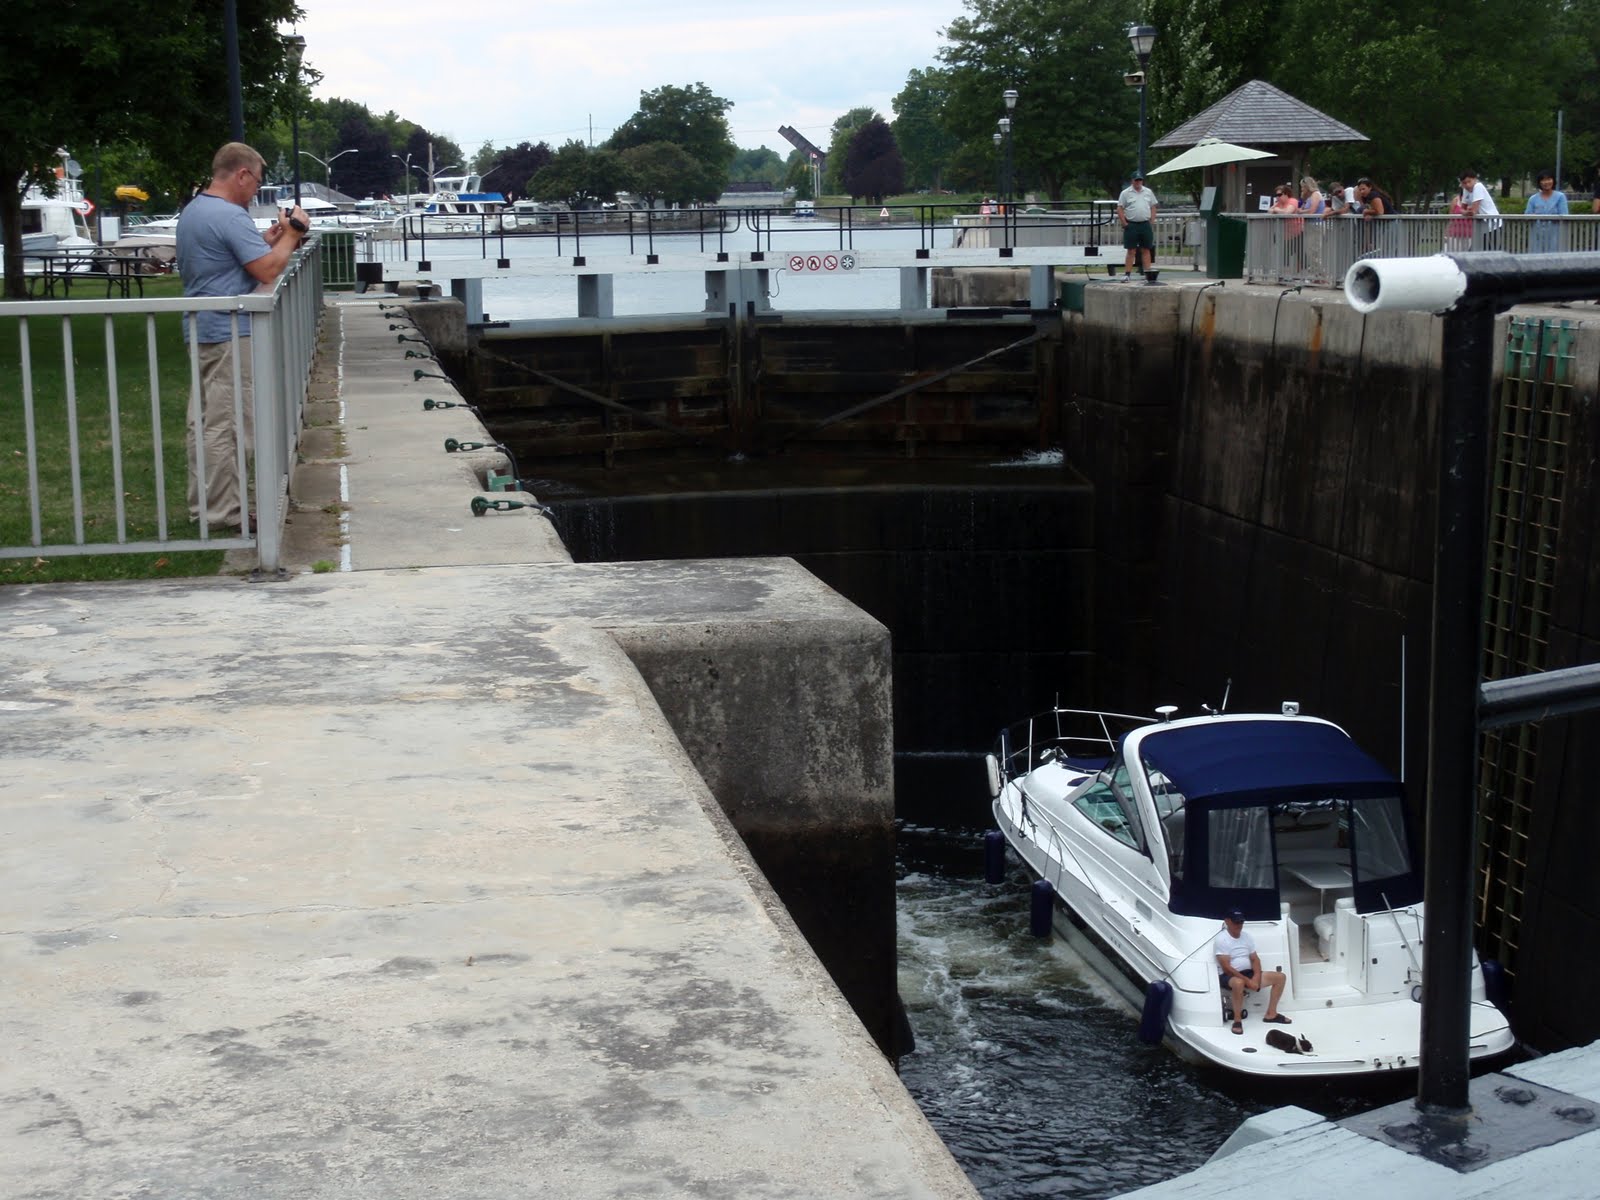 A boat going through one of many locks.